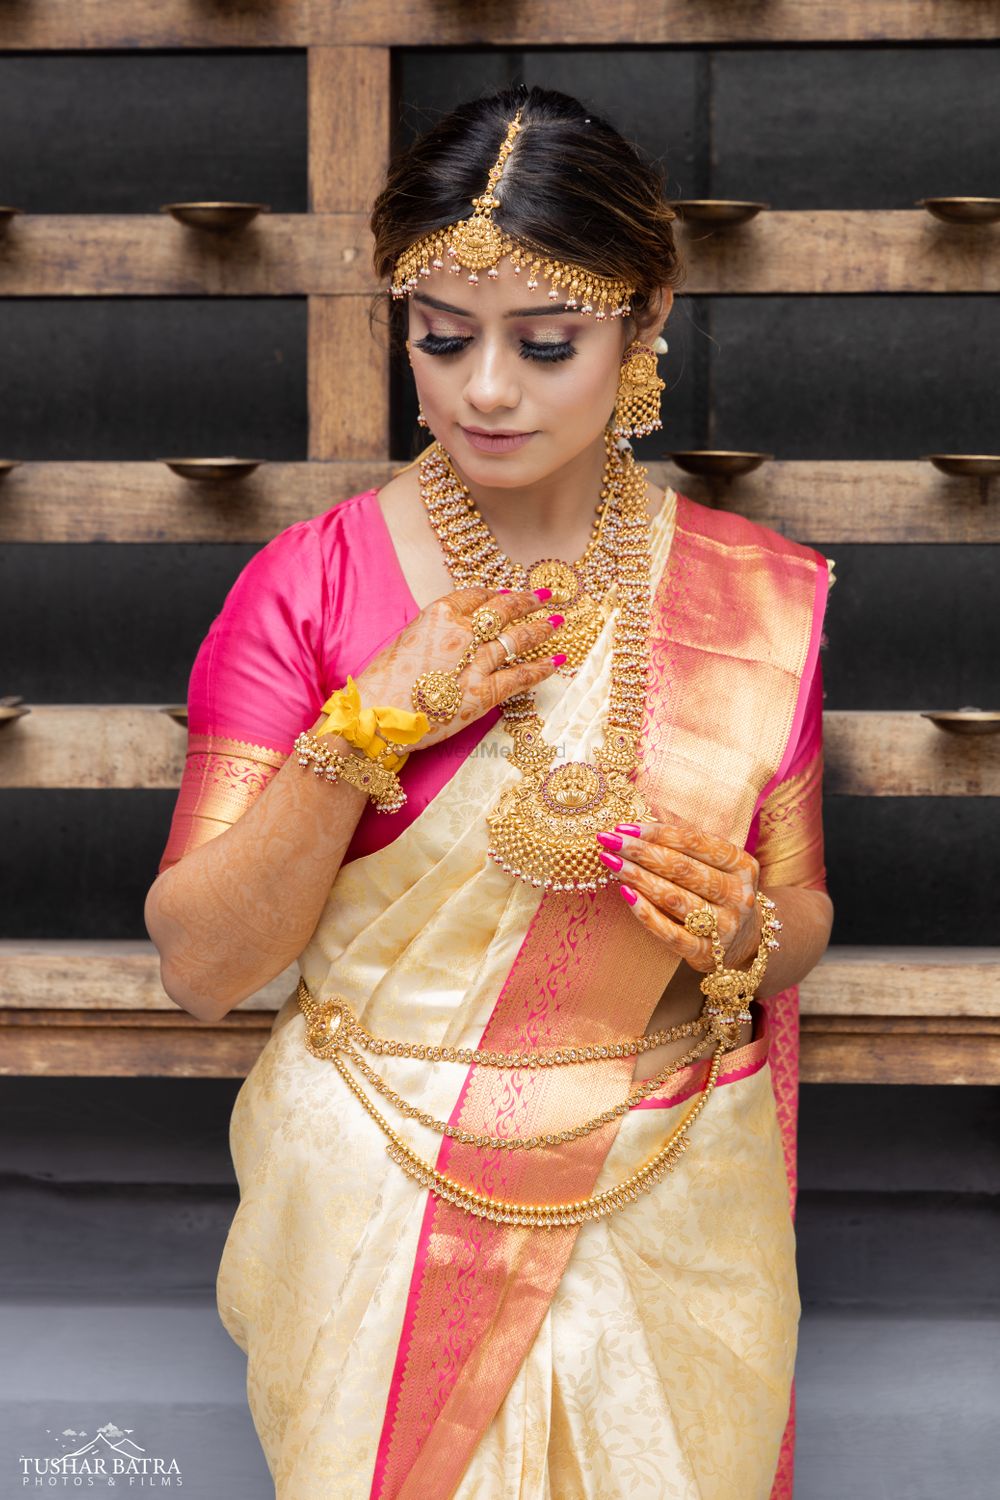 Photo of Beautiful South-Indian bride Isha looking radiant in her pastel saree and some stunning traditional jewellery captured by Tushar Batra Films.